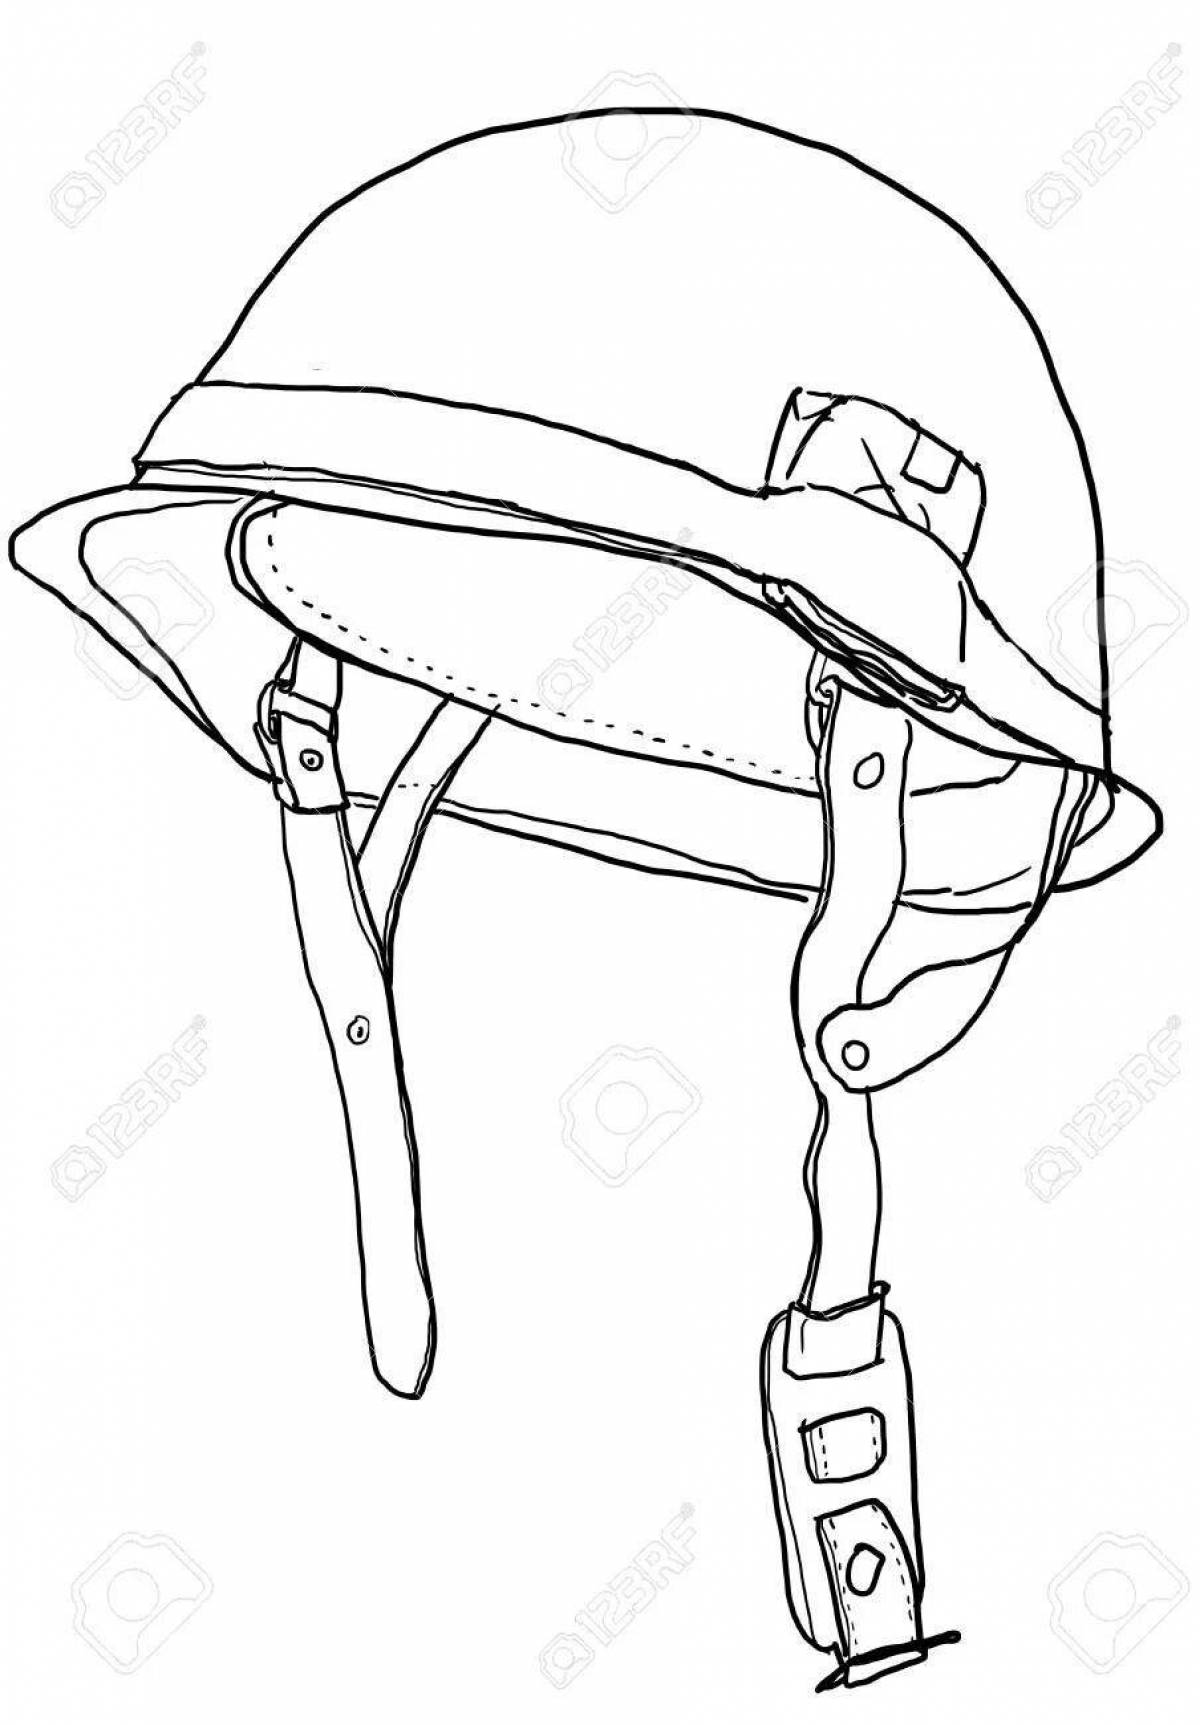 Shiny soldier helmet coloring page